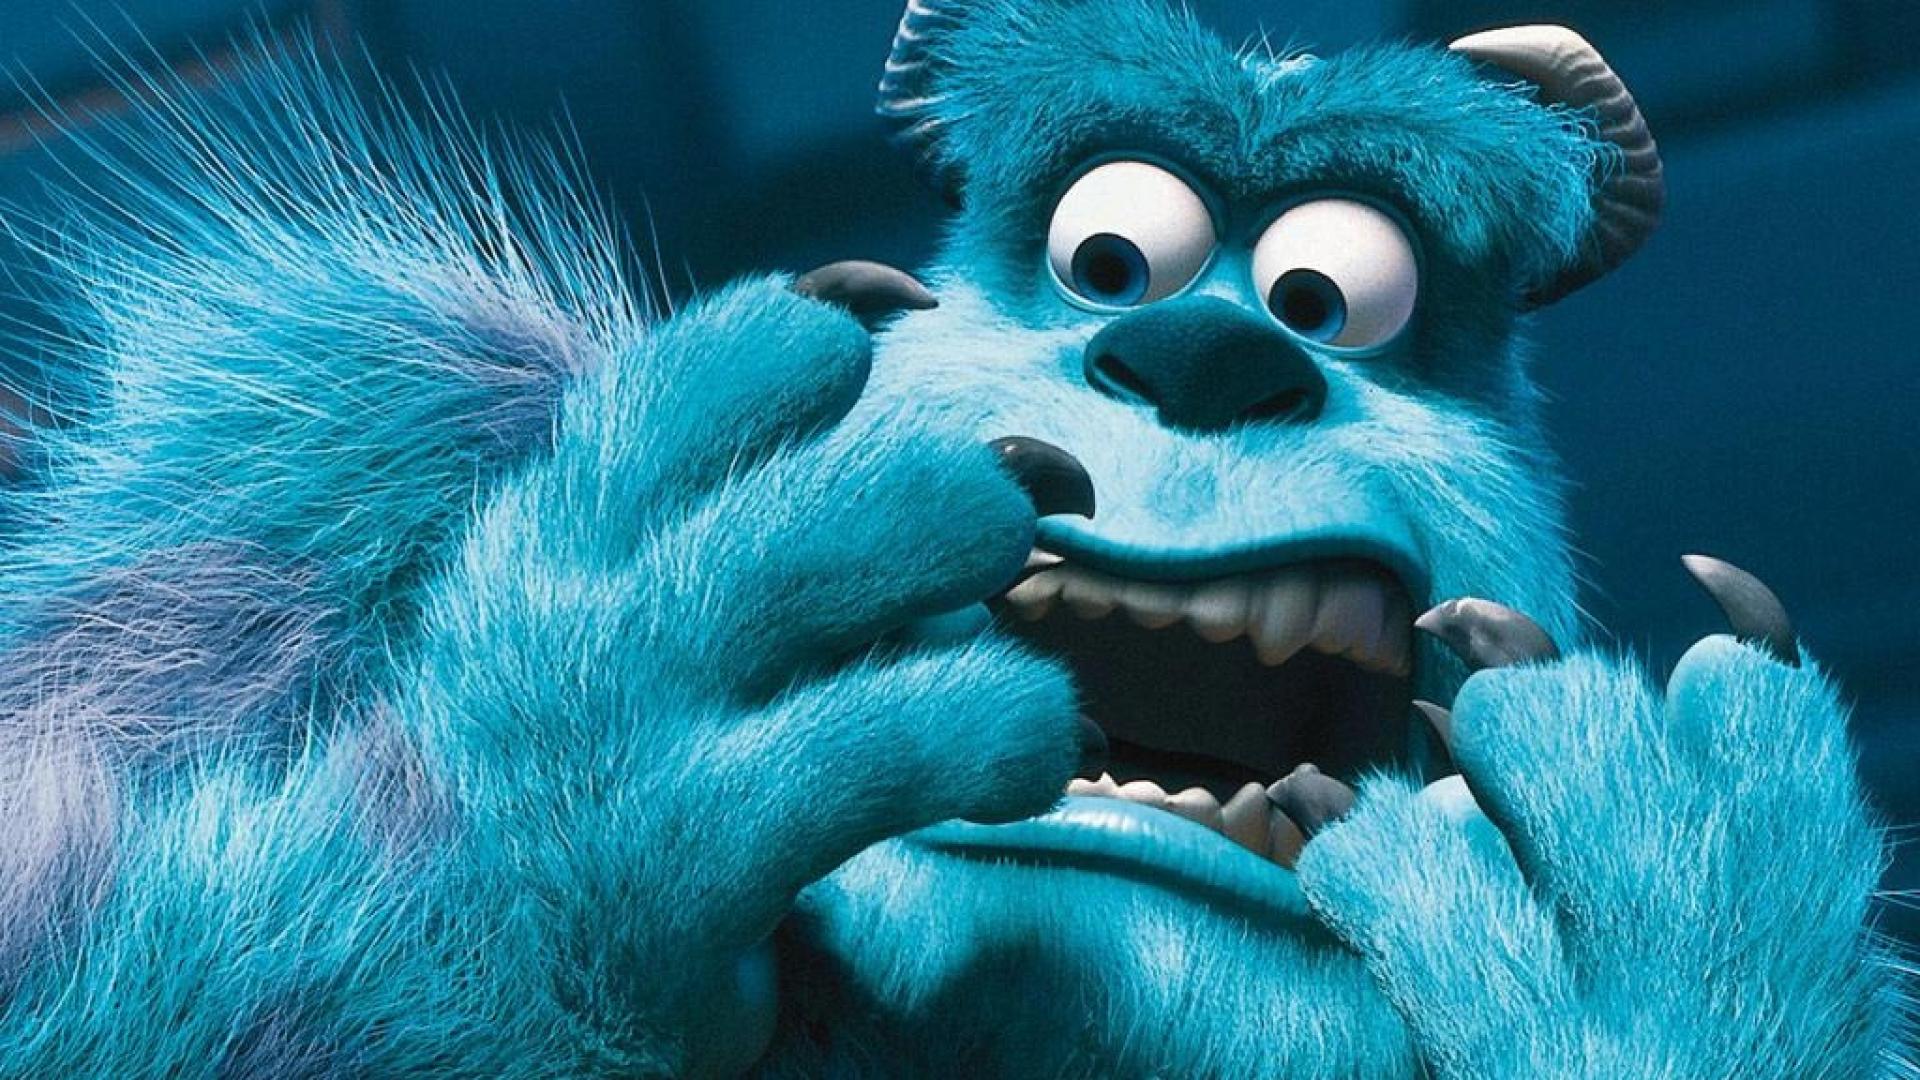 Monsters animation movies hd wallpaper Latest HD Backgrounds